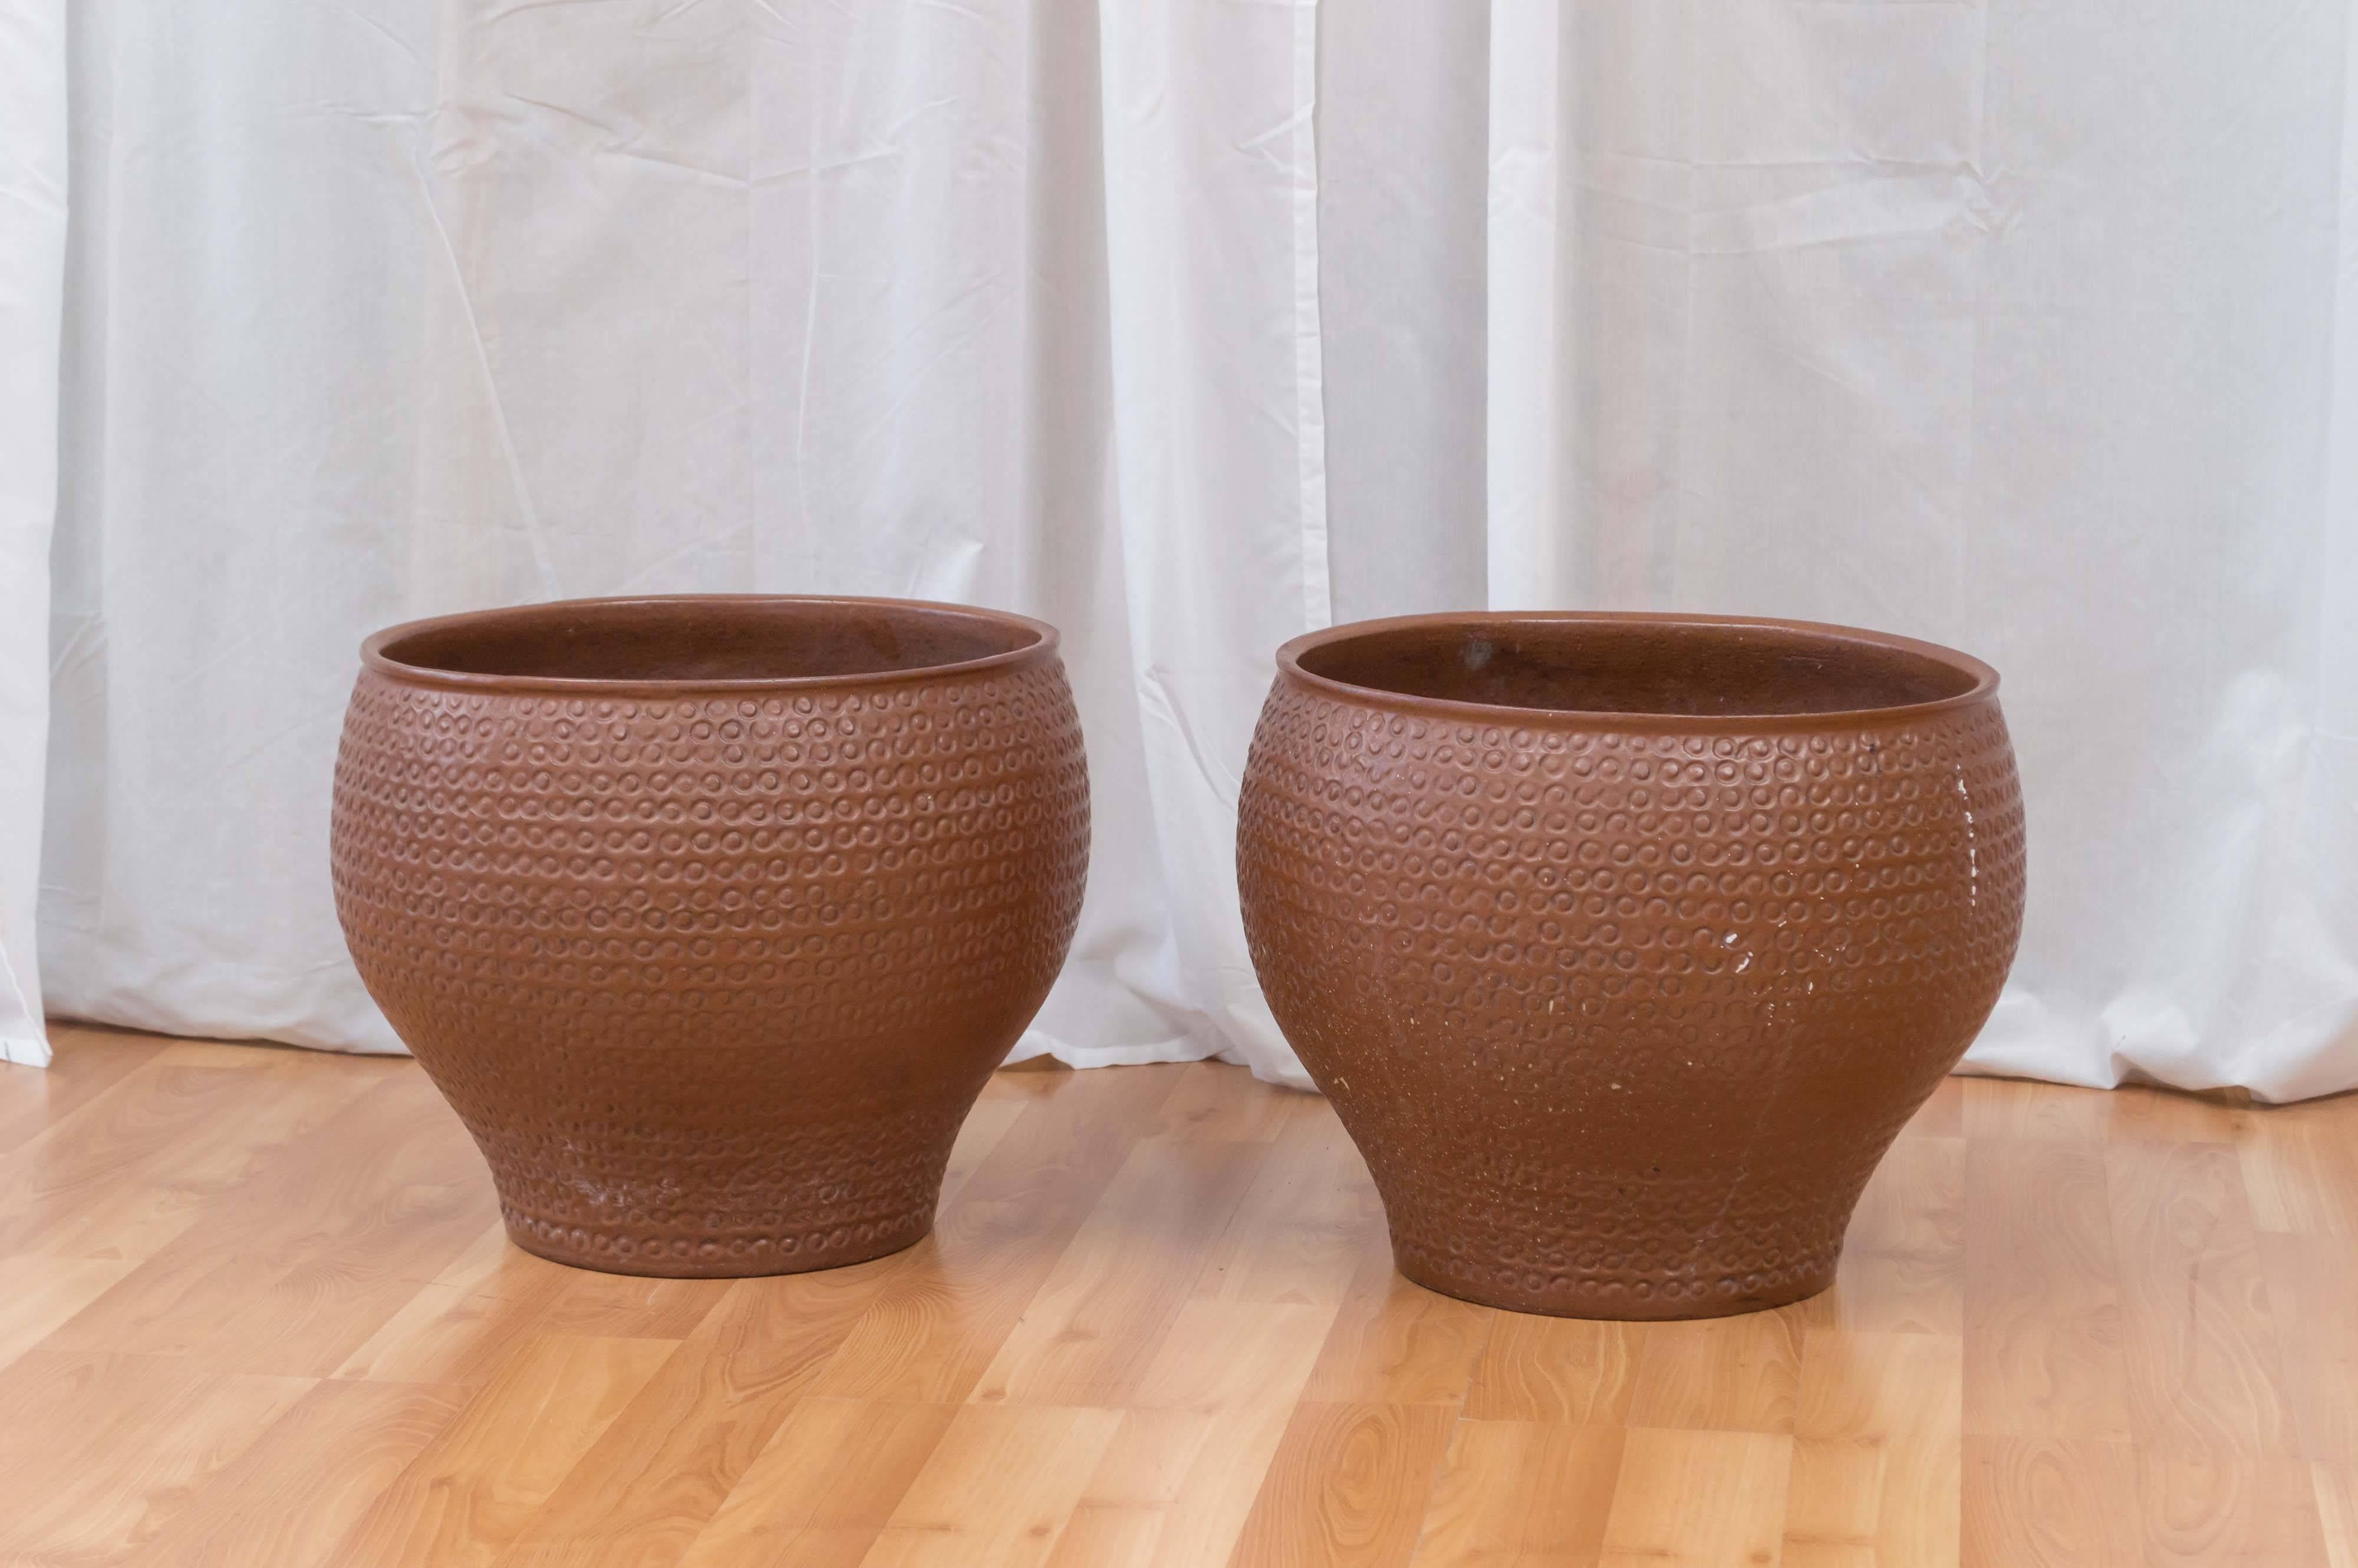 Pair of planters circa 1960s by David Cressey for Architectural Pottery. This design is known by dealers and collectors as Cheerio. Company was based out of Los Angeles California. They are Classic California Modern.